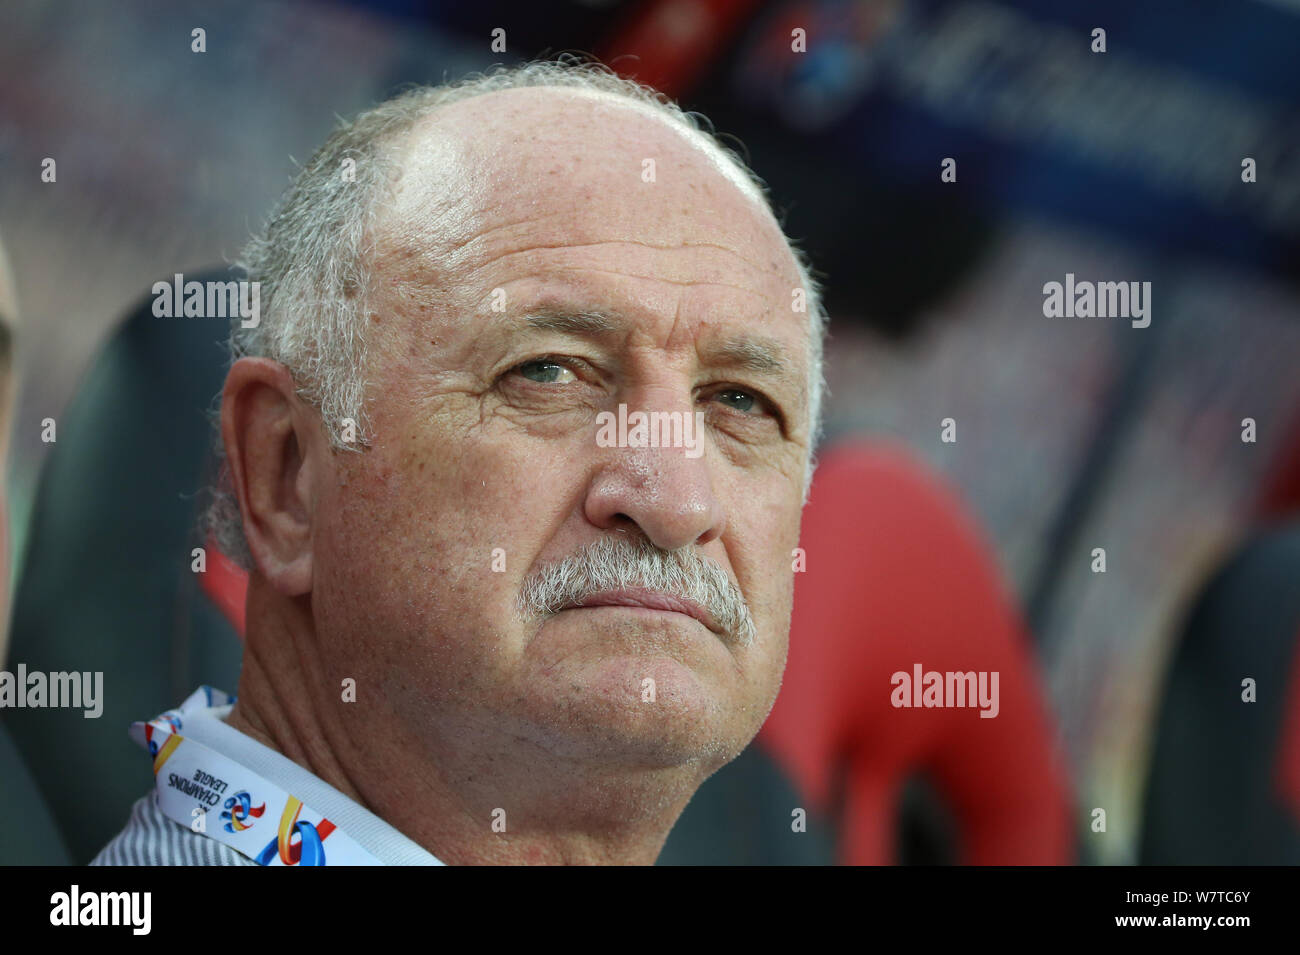 Head coach Luiz Felipe Scolari of China's Guangzhou Evergrande F.C. watches his players competing against South Korea's Suwon Samsung Bluewings in a G Stock Photo